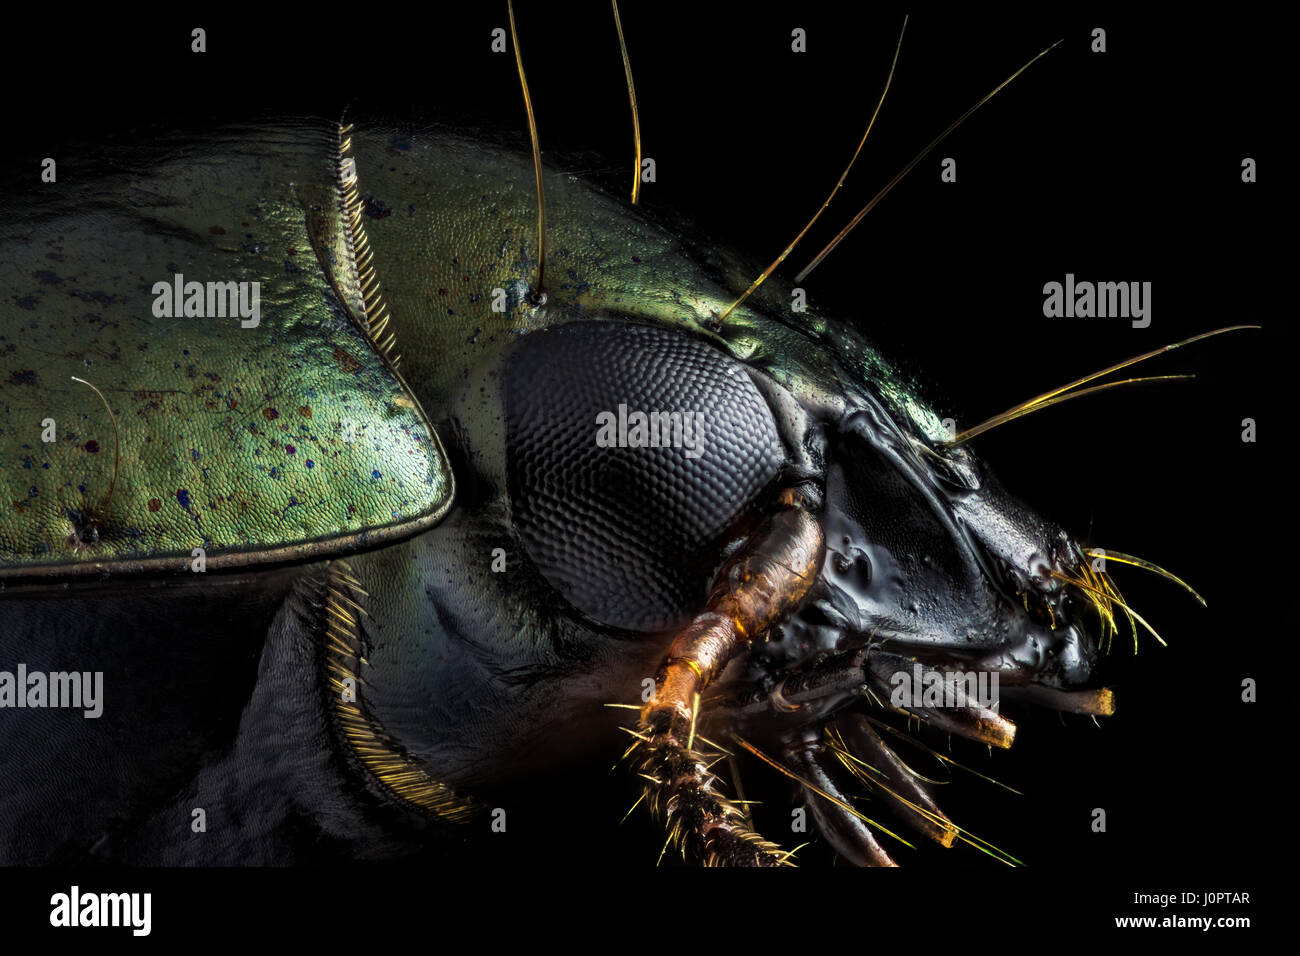 Extreme macro - Profile portrait of a green beetle photographed through a microscope at x10 magnification. Stock Photo